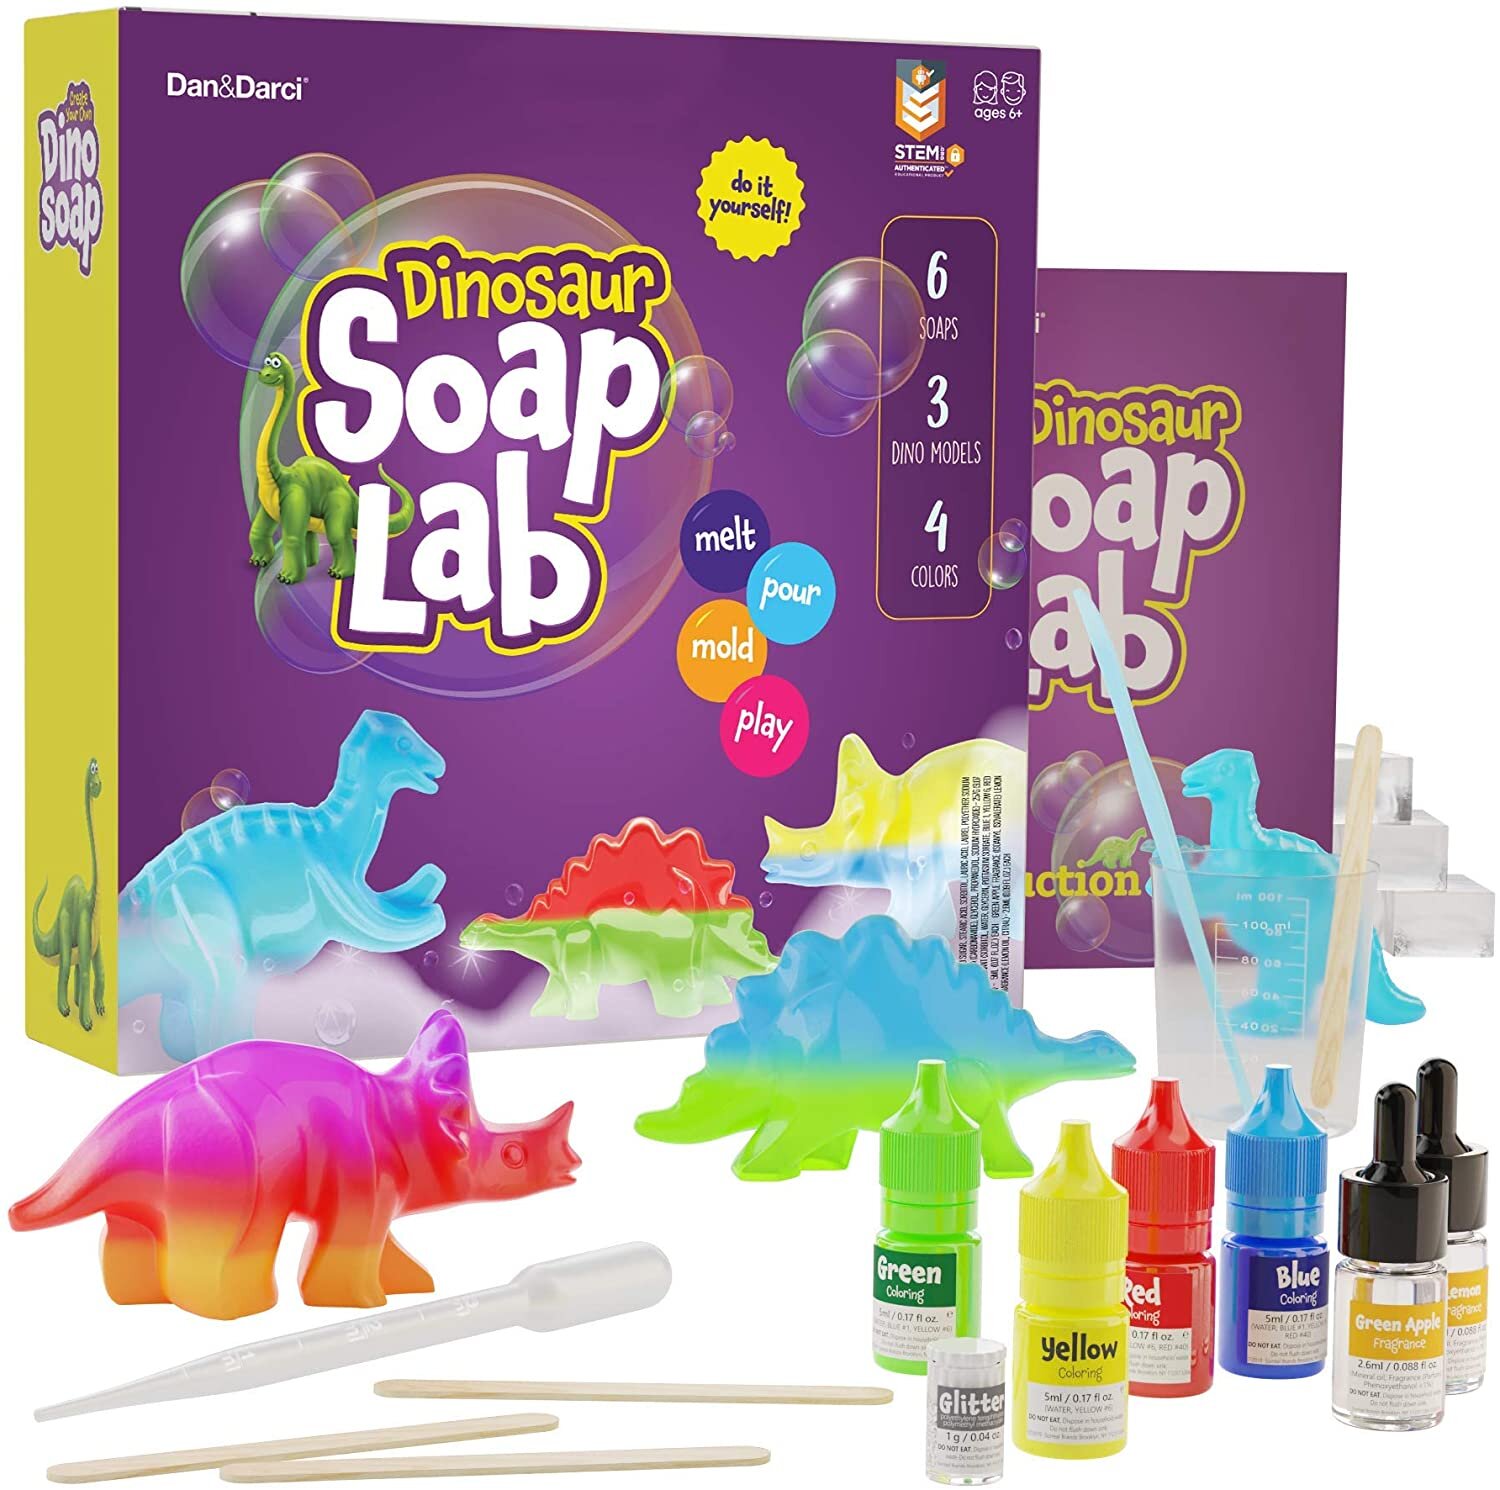 Darice Dino Soap Making Kit for Kids, Crafts Activity Science Kits, Stem DIY Educational Dinosaur Toys for Boys & Girls Ages 6+